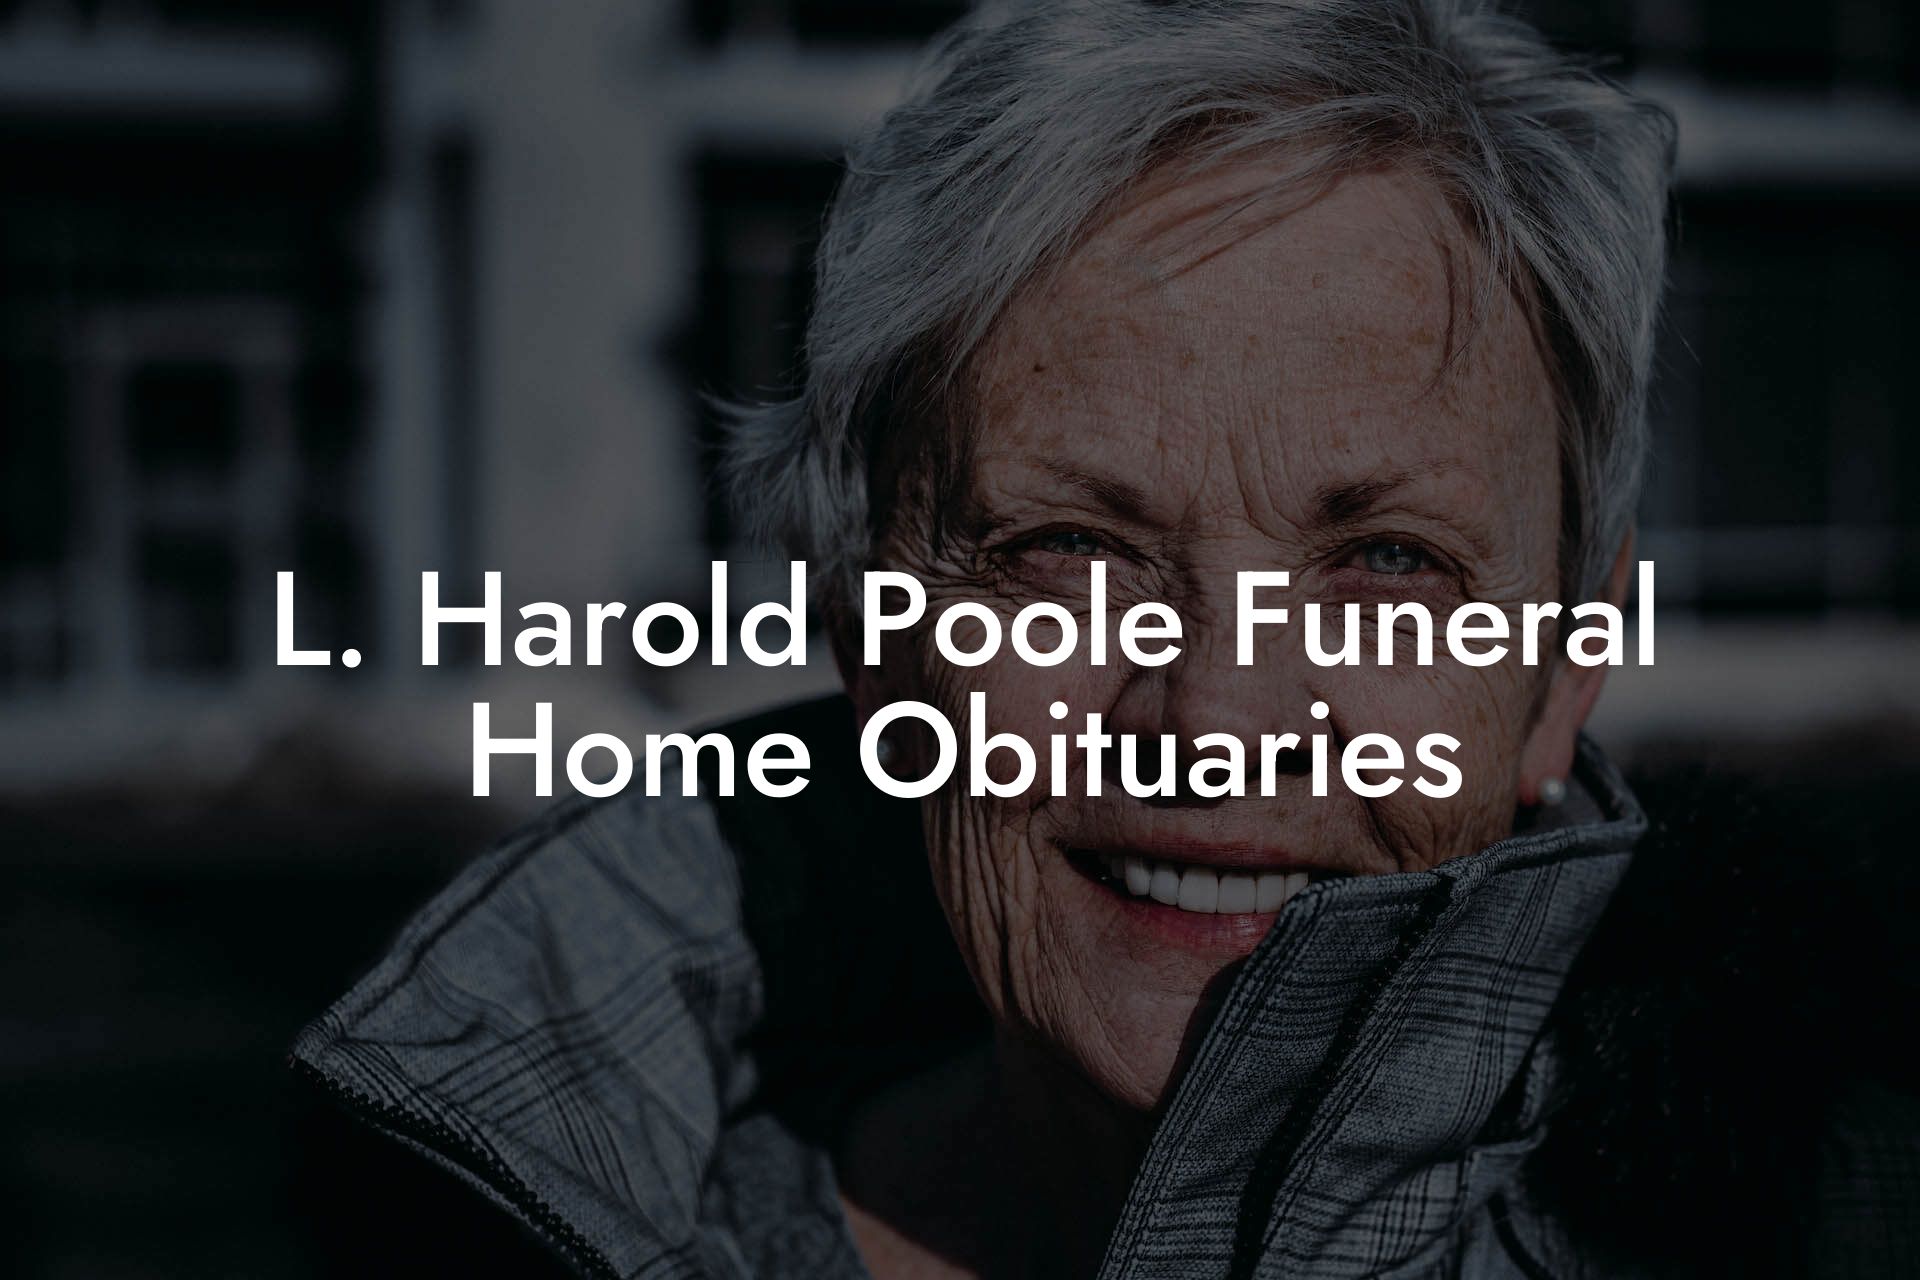 L. Harold Poole Funeral Home Obituaries - Eulogy Assistant